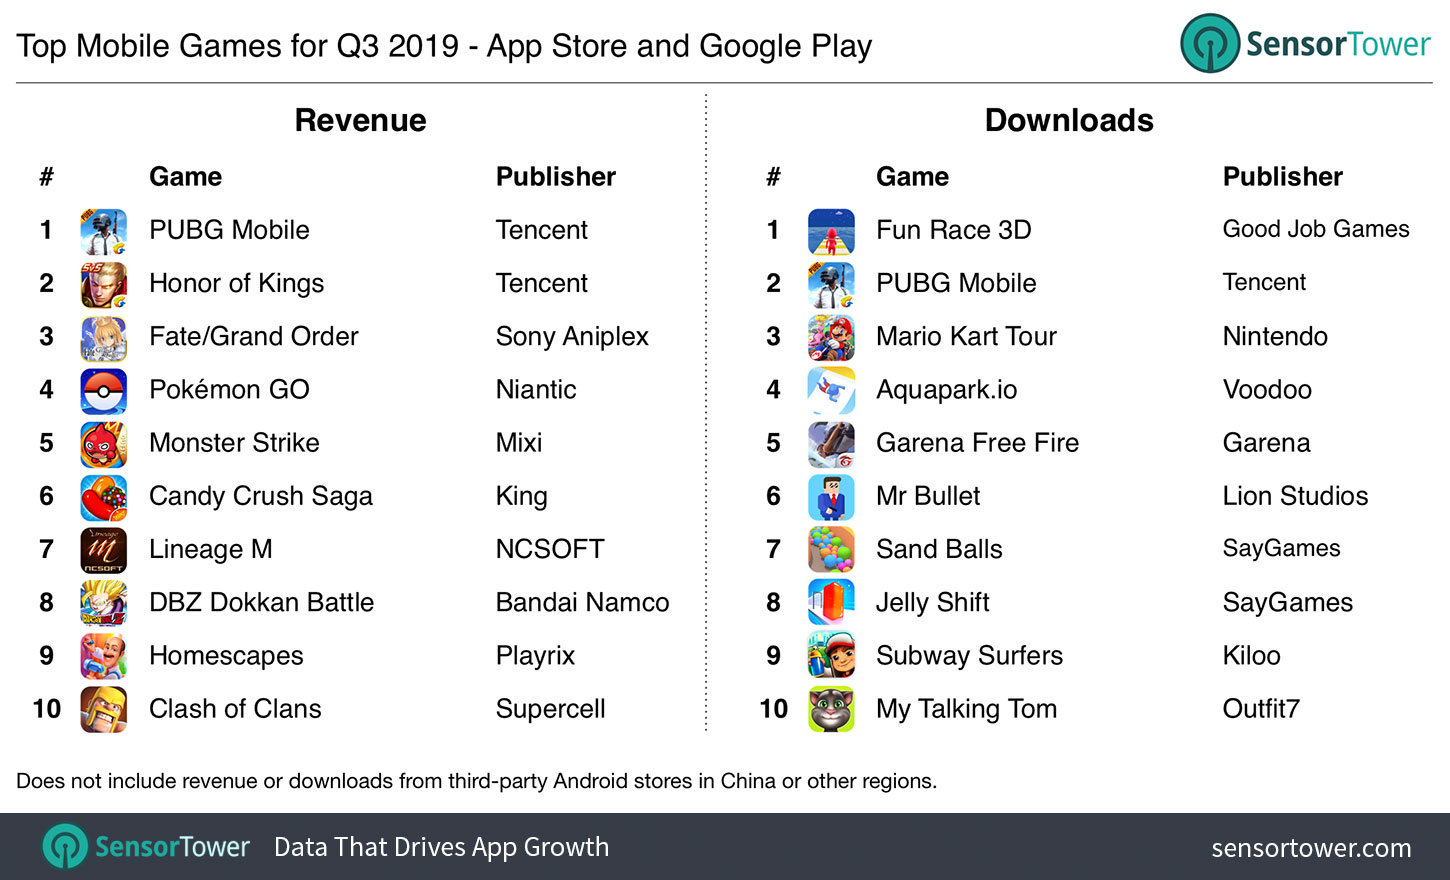 Q3 2019 Top Mobile Games by Revenue and Downloads